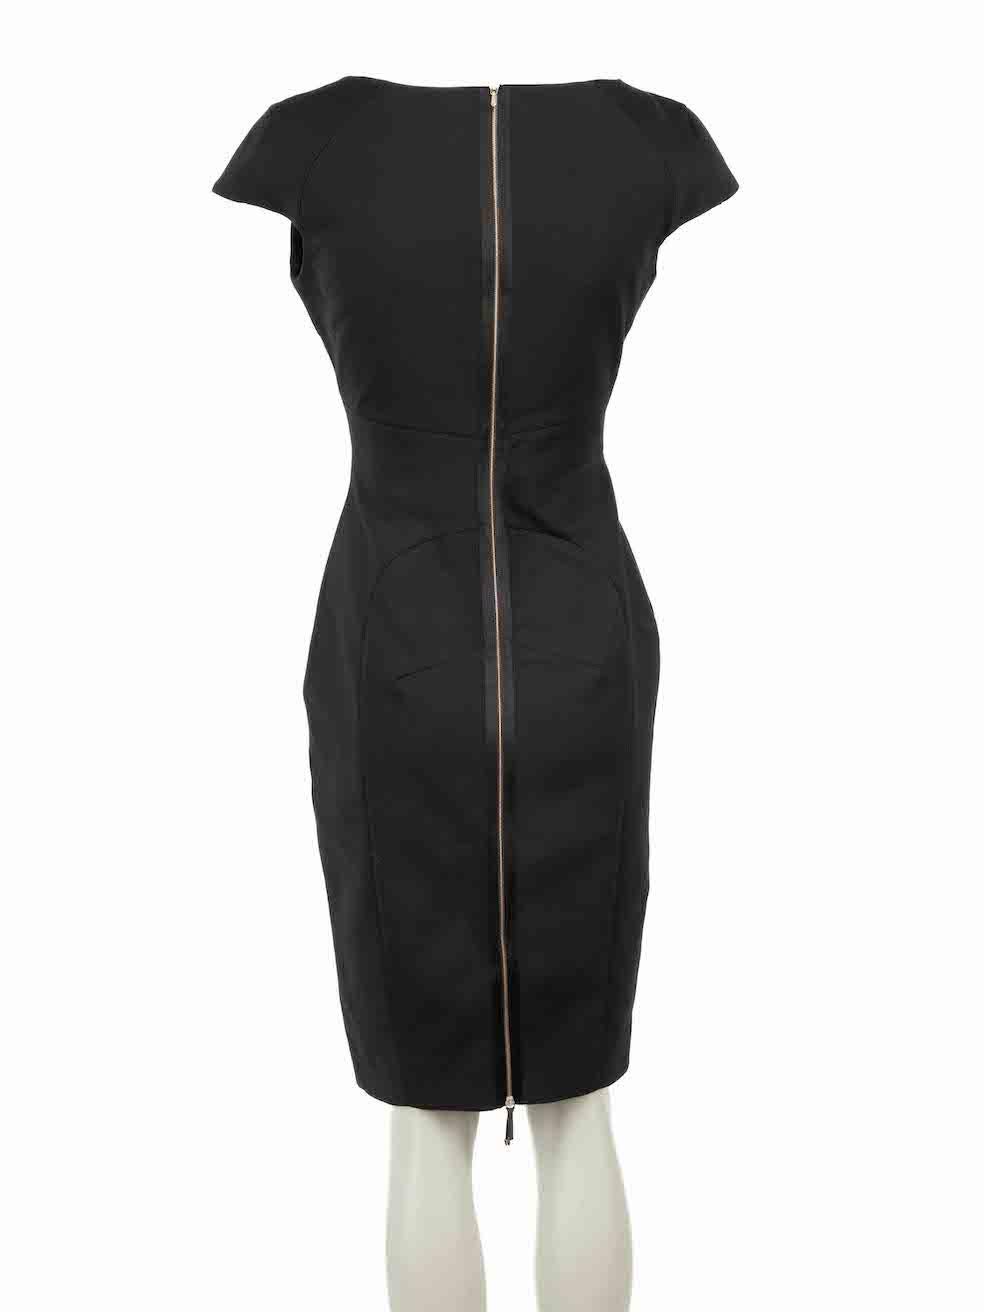 Victoria Beckham Black Round Neck Bodycon Dress Size M In Excellent Condition For Sale In London, GB